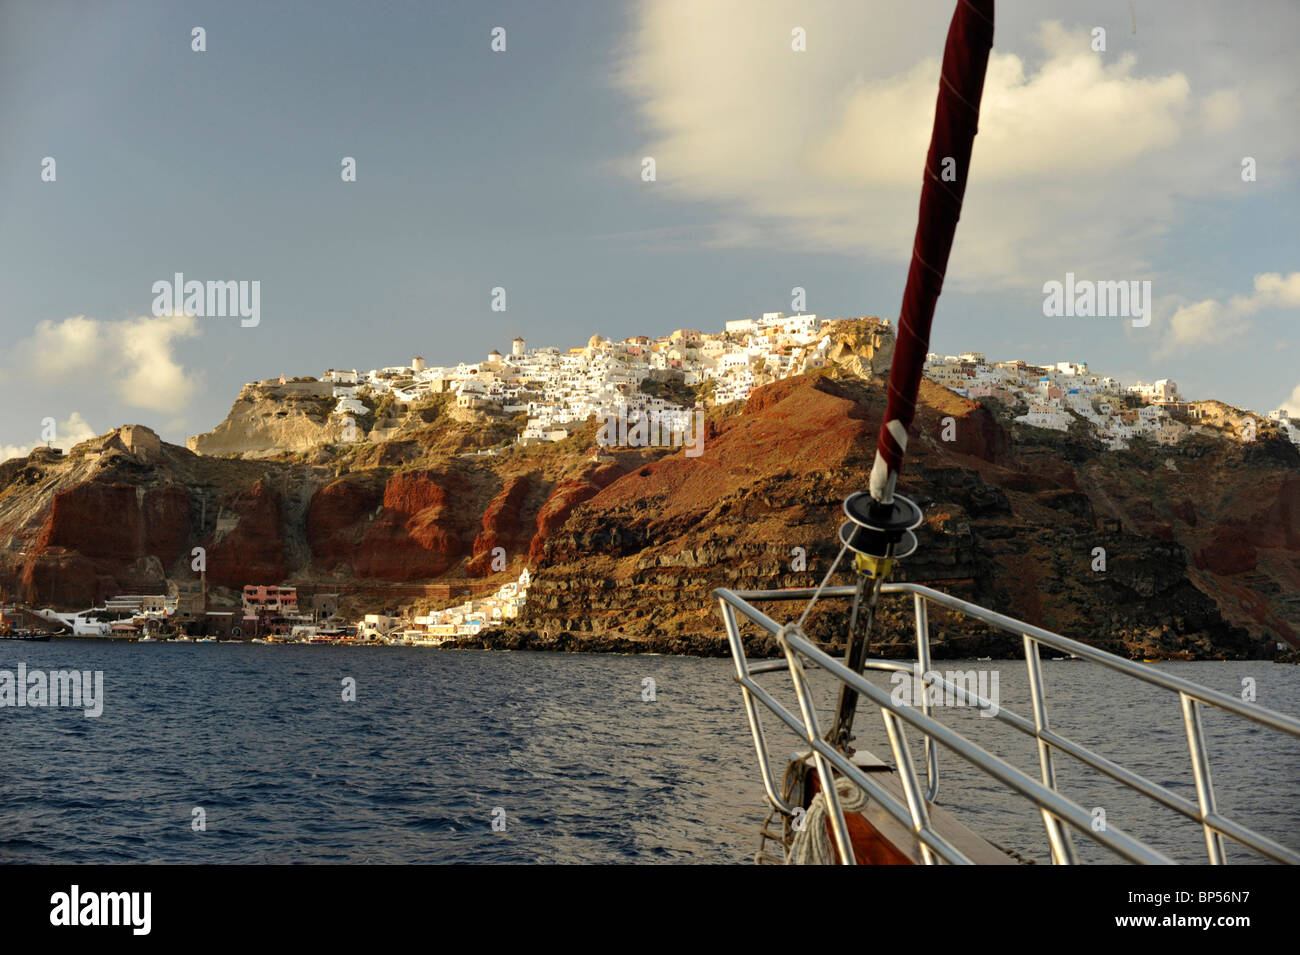 View of the town of Oia on the Island of Santorini from the front of a tourist boat. Stock Photo